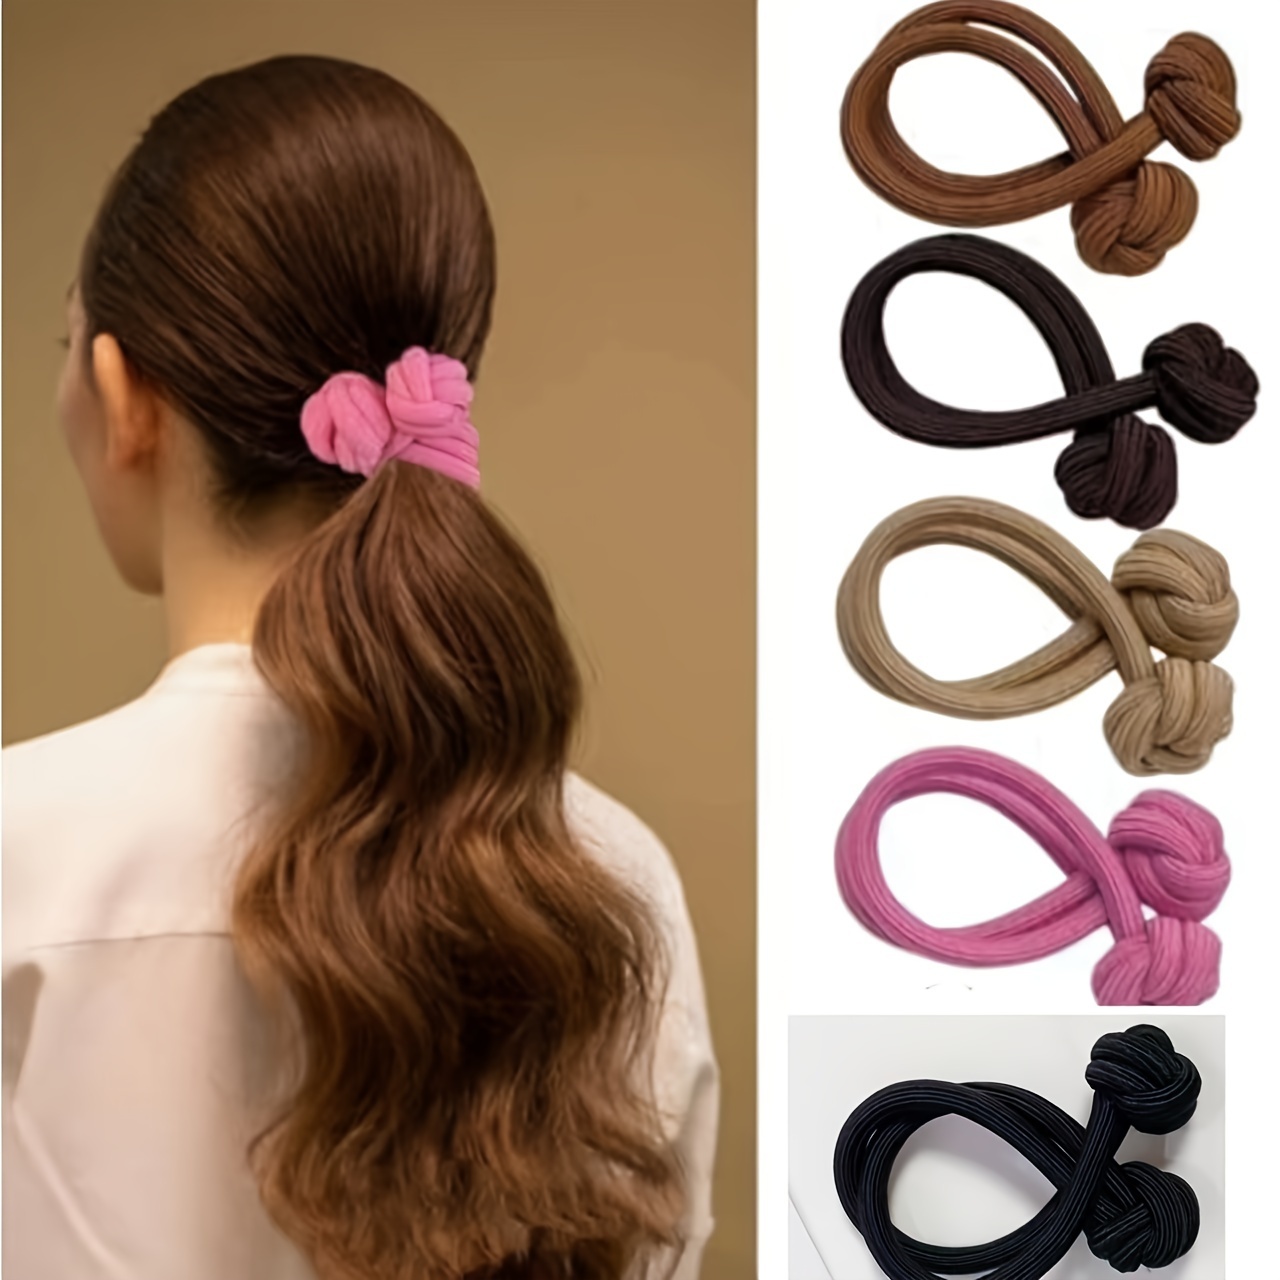 

5-pack Cute Bowknot Hair Ties For Women & Girls - High Elasticity, No-damage Ponytail Holders, Solid Color Hair Accessories For Women Hair Ties For Thick Hair